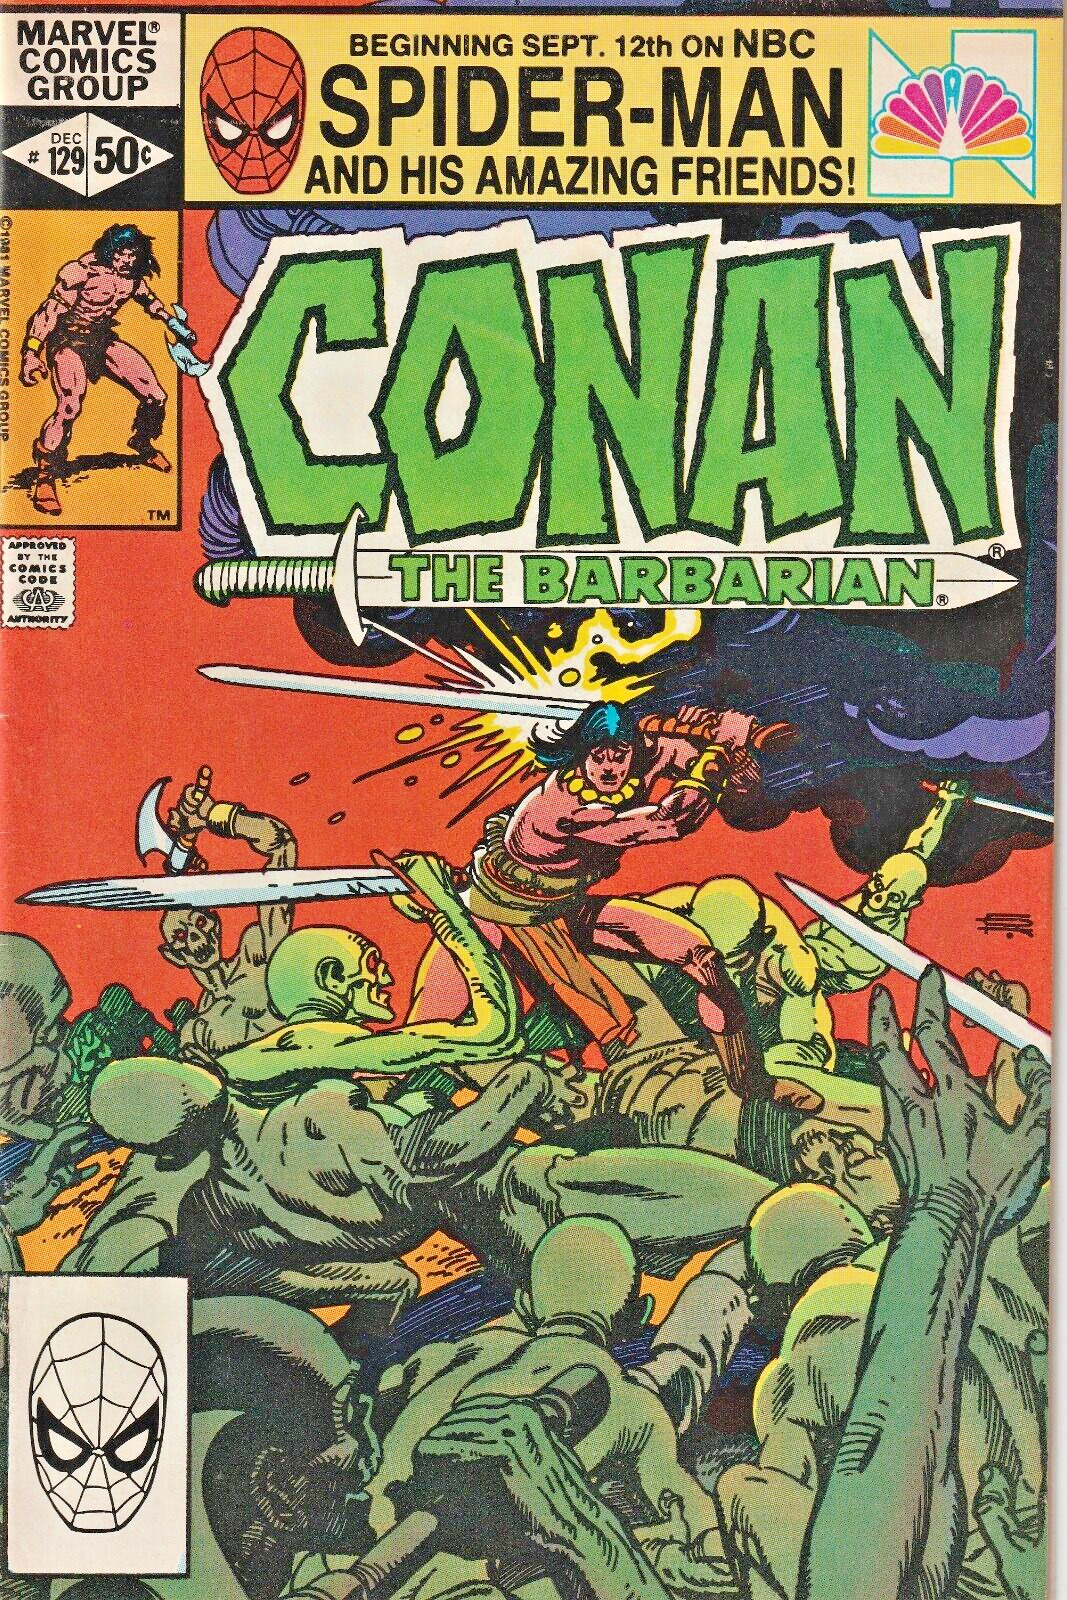 CONAN THE BARBARIAN #129  THE CREATION QUEST   MARVEL  1981  NICE